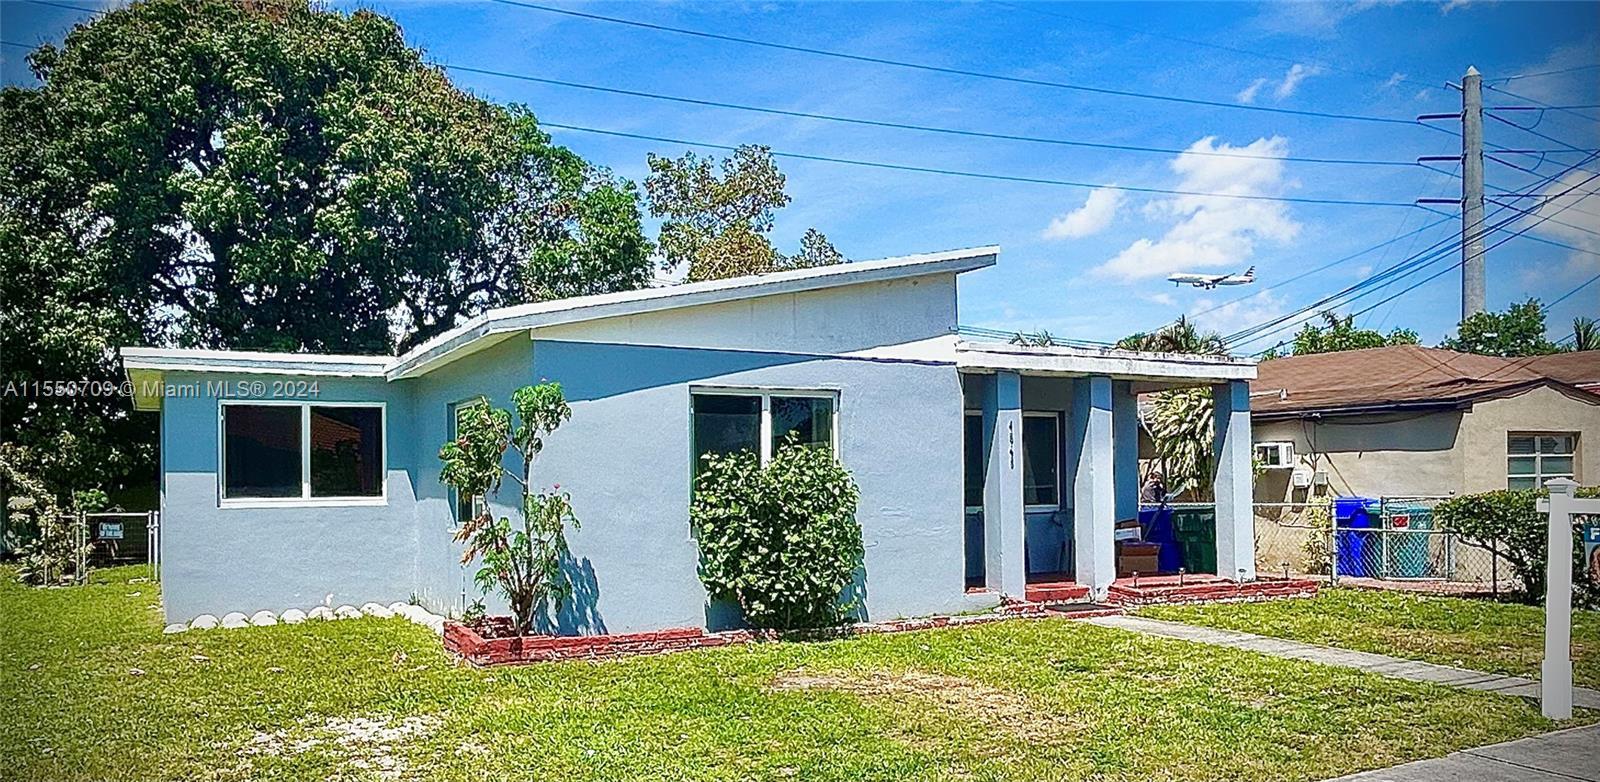 Photo of 4545 NW 4th Ter in Miami, FL